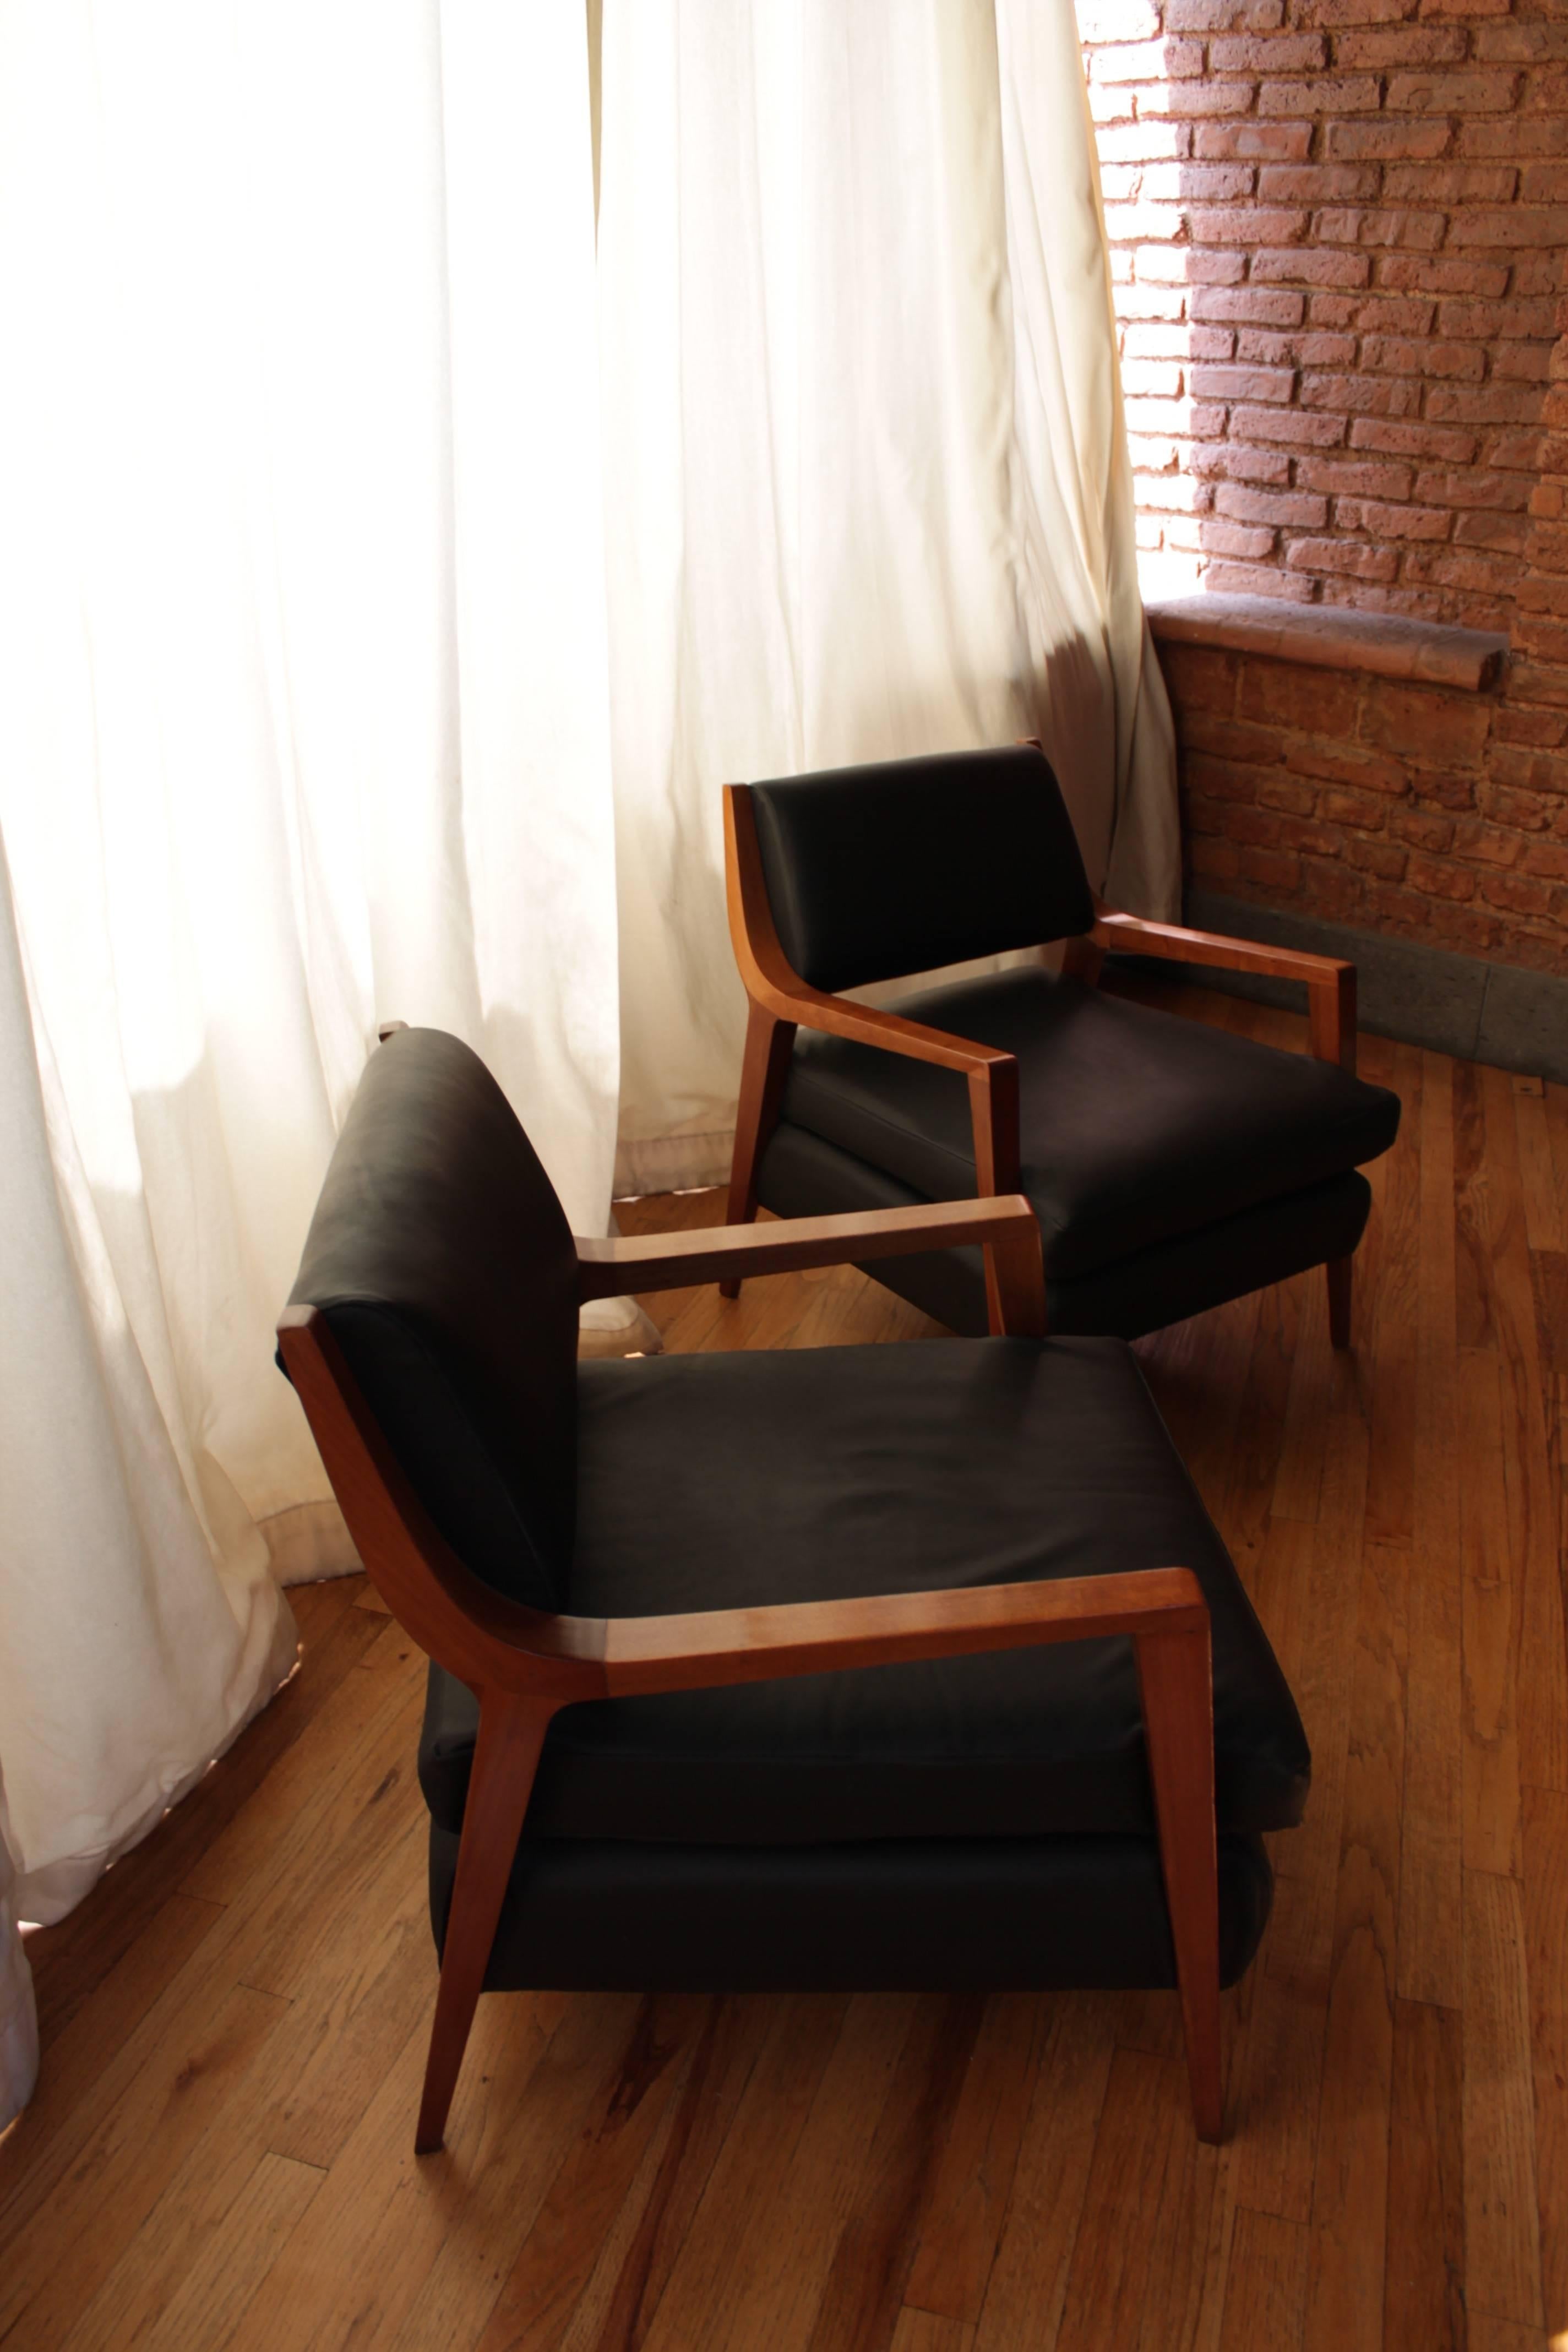 Mexican Pair of Van Beuren Chairs of Mahogany Wood with Black Leather Seats For Sale